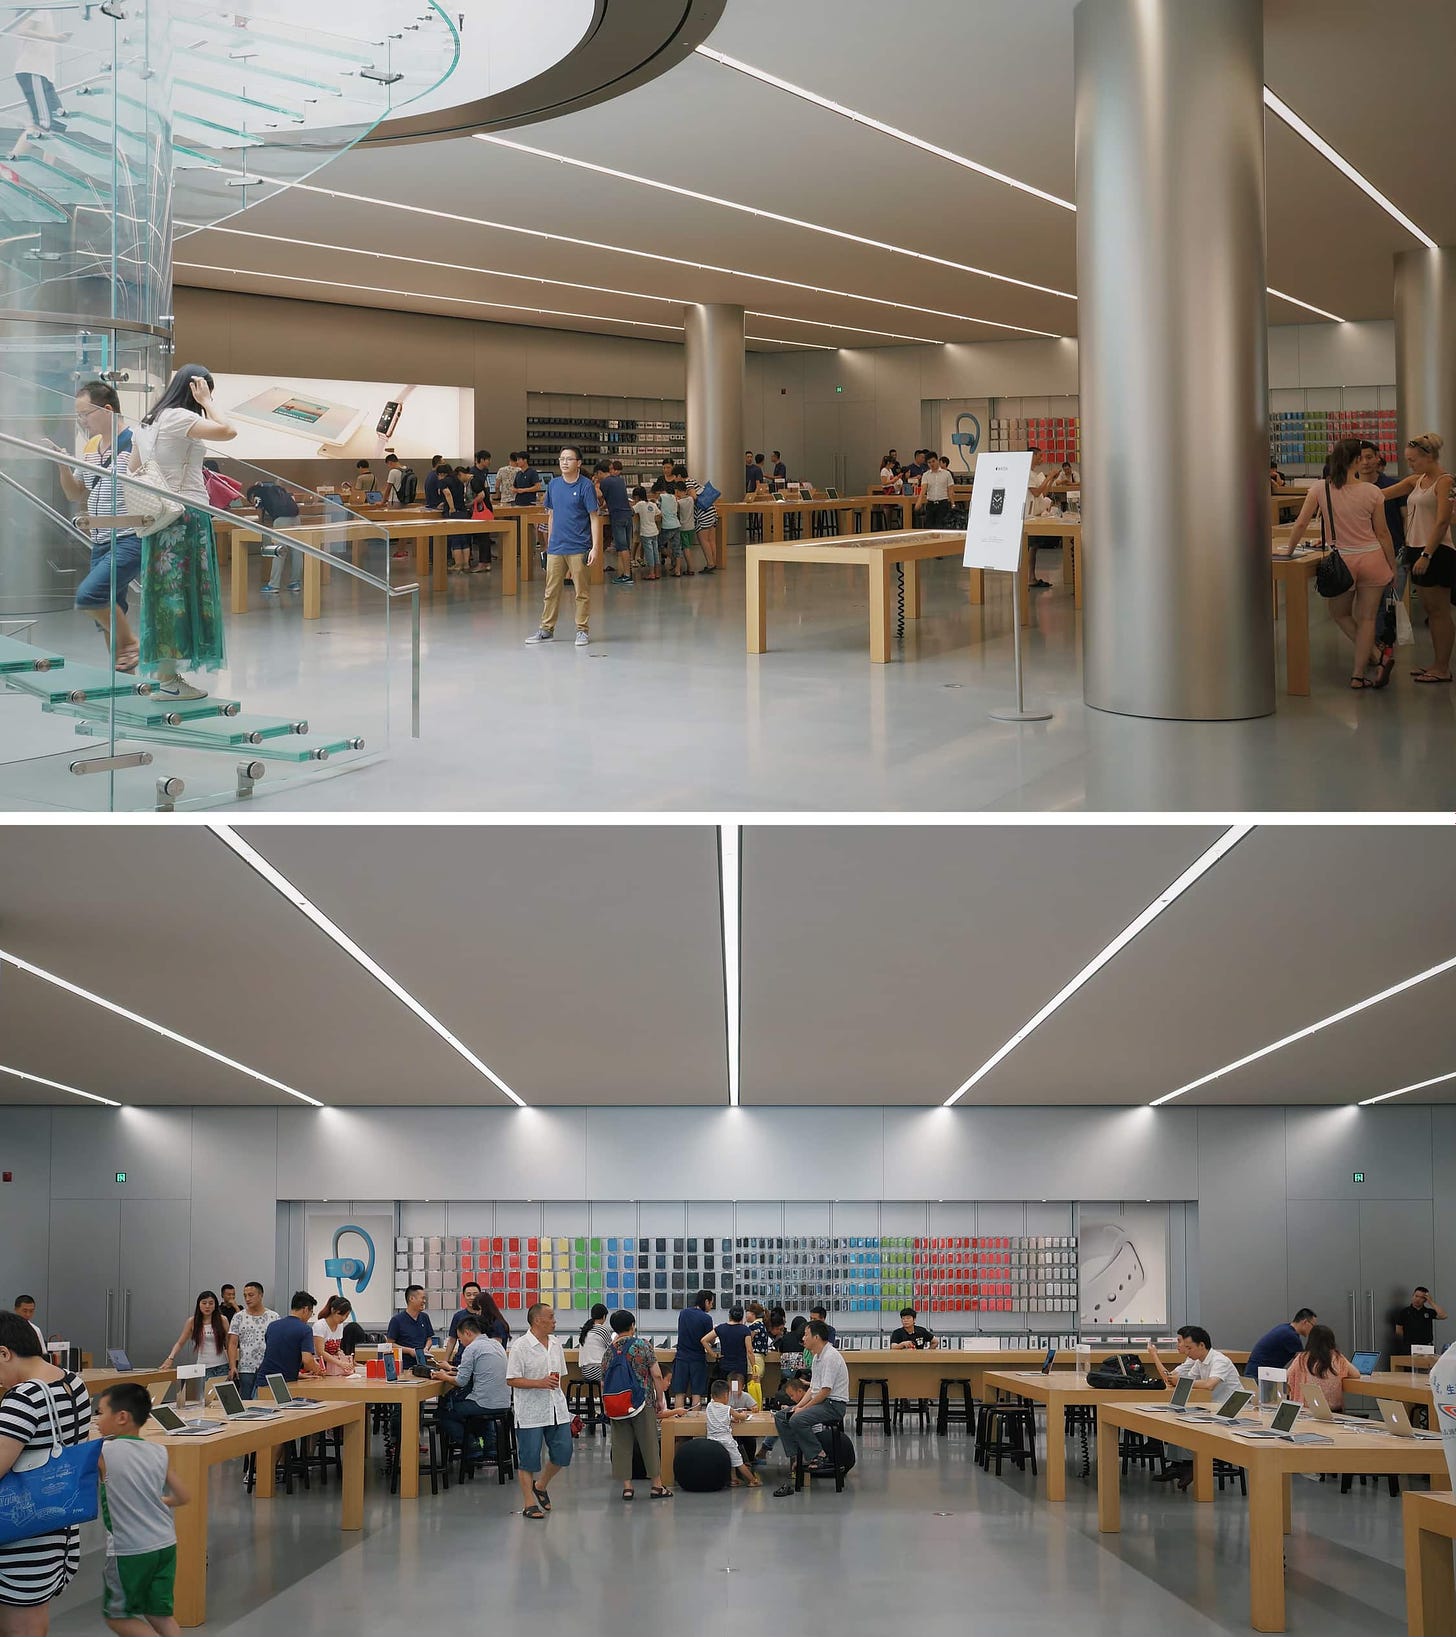 Two interior views of Apple Jiefangbei. The store has a glass staircase and large, round stainless steel columns.